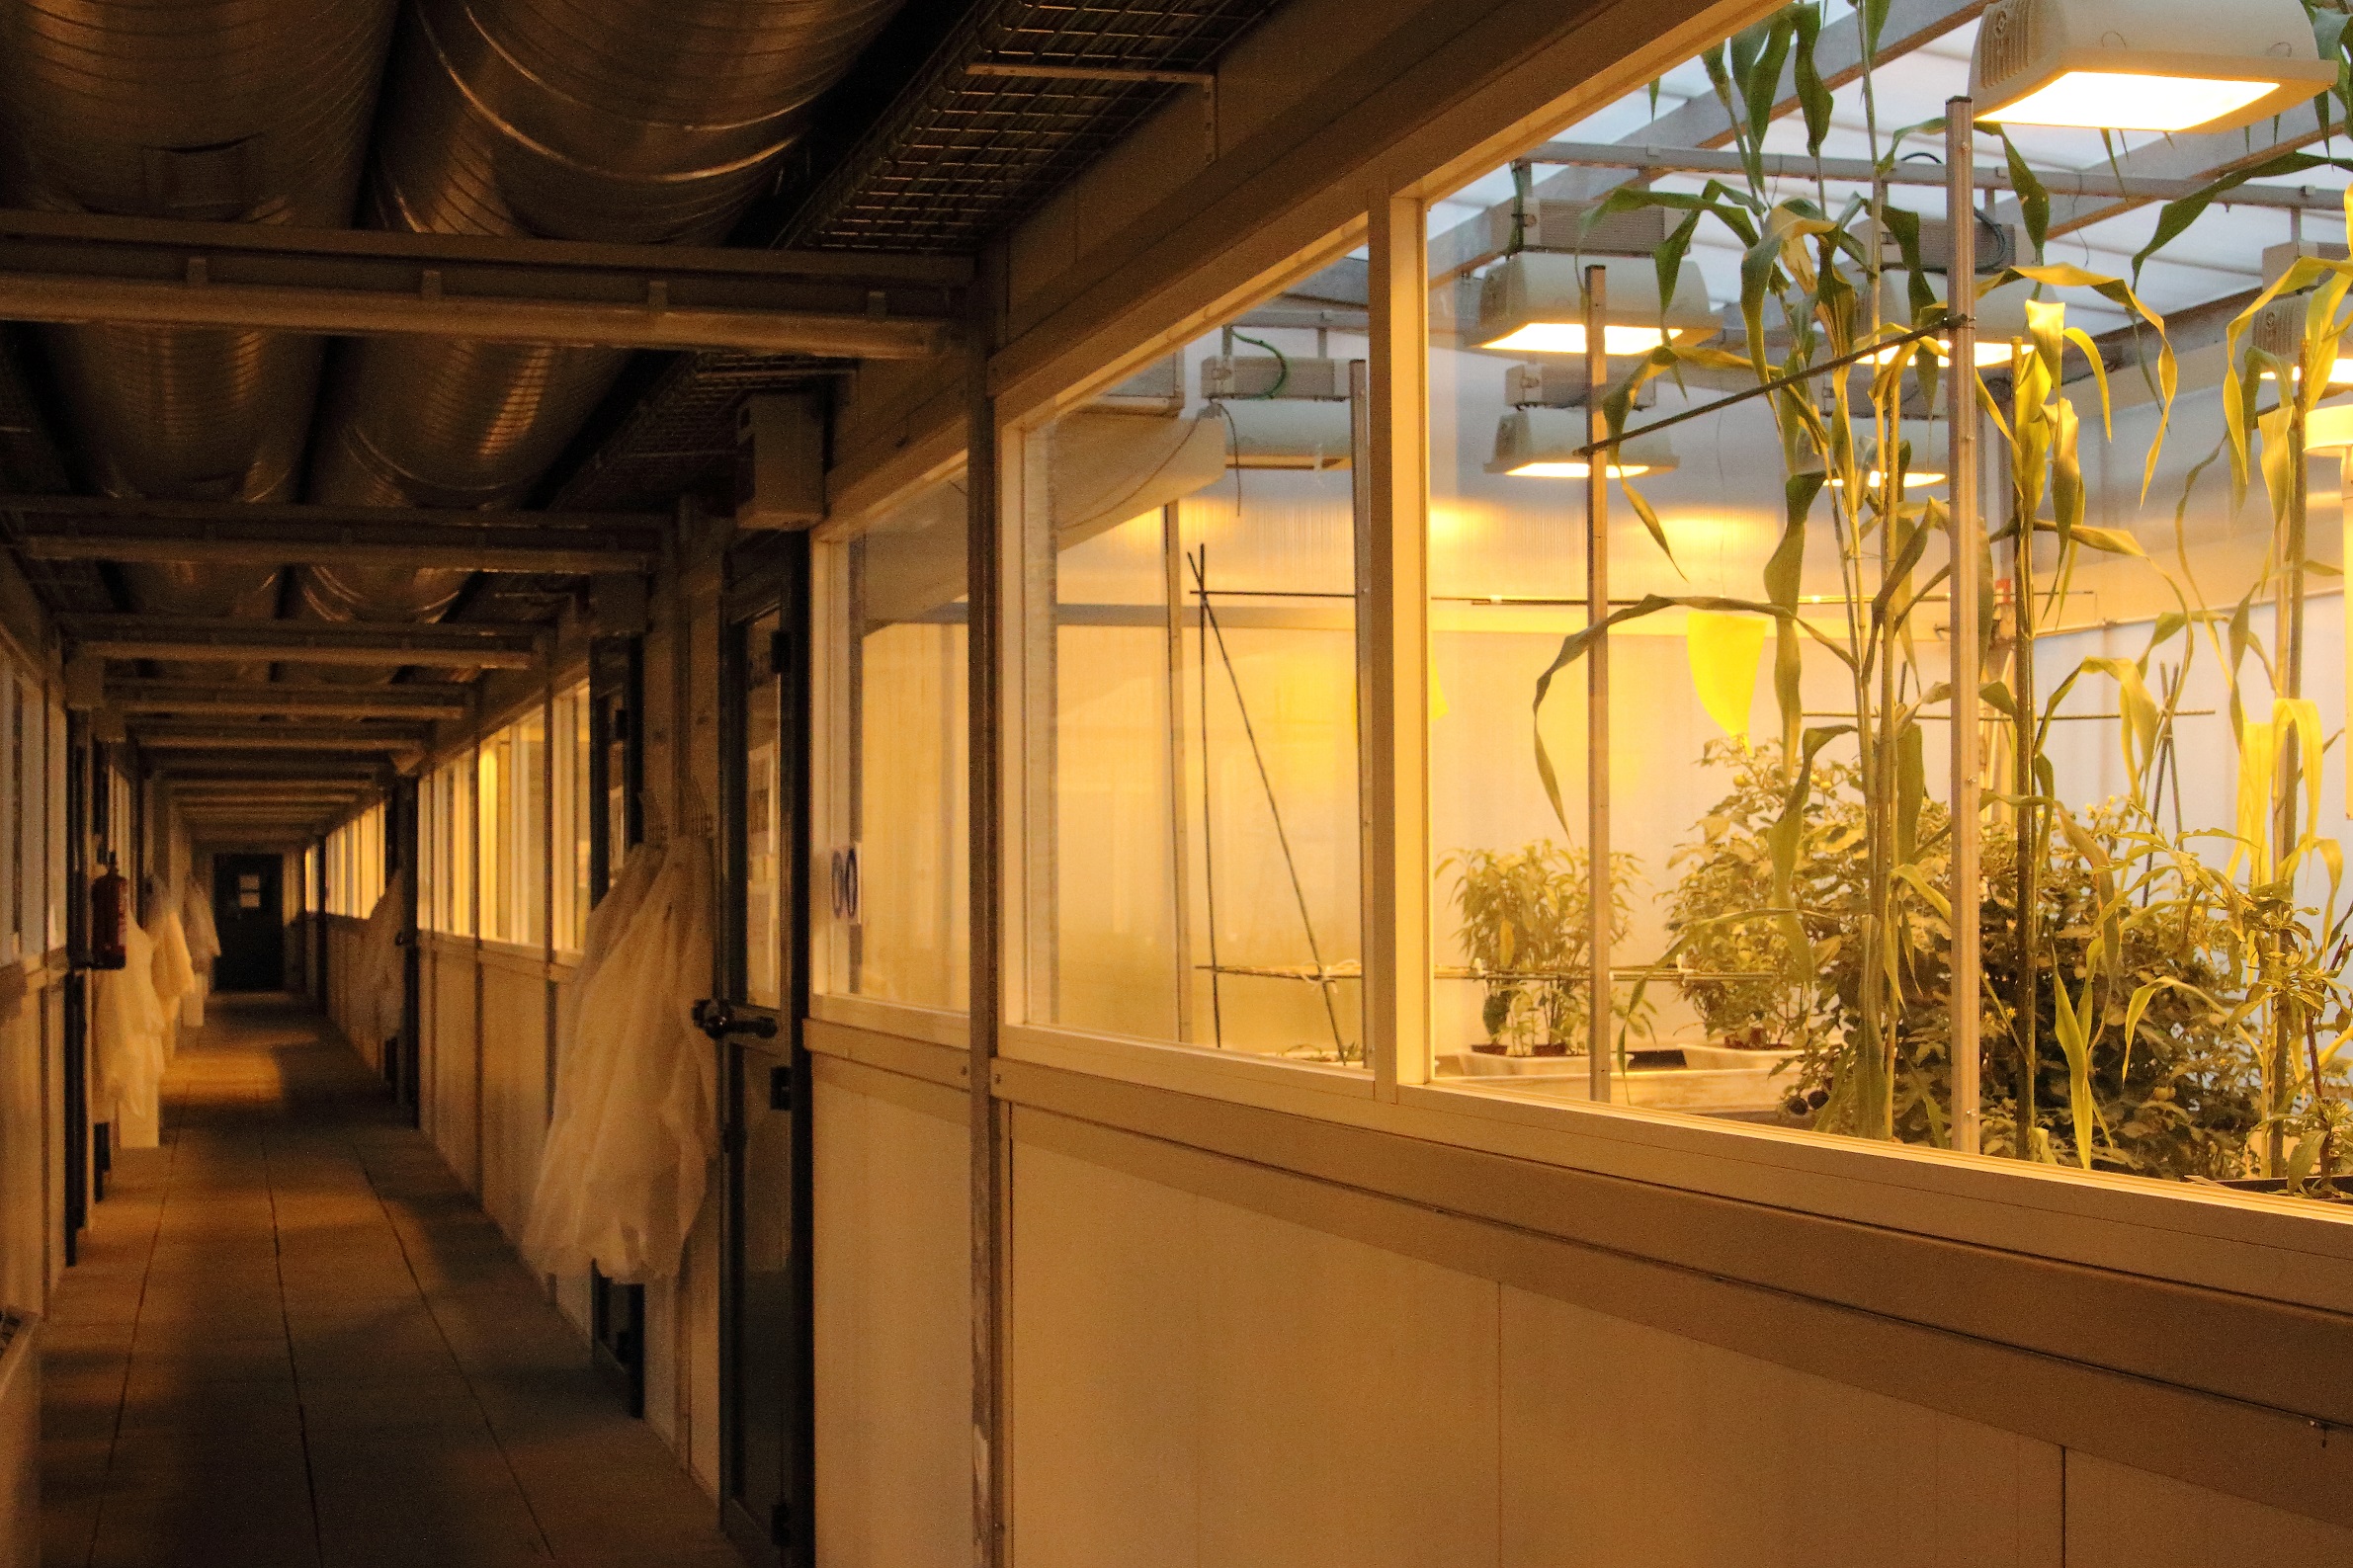 CRAG's facilities for plant growth and cultures